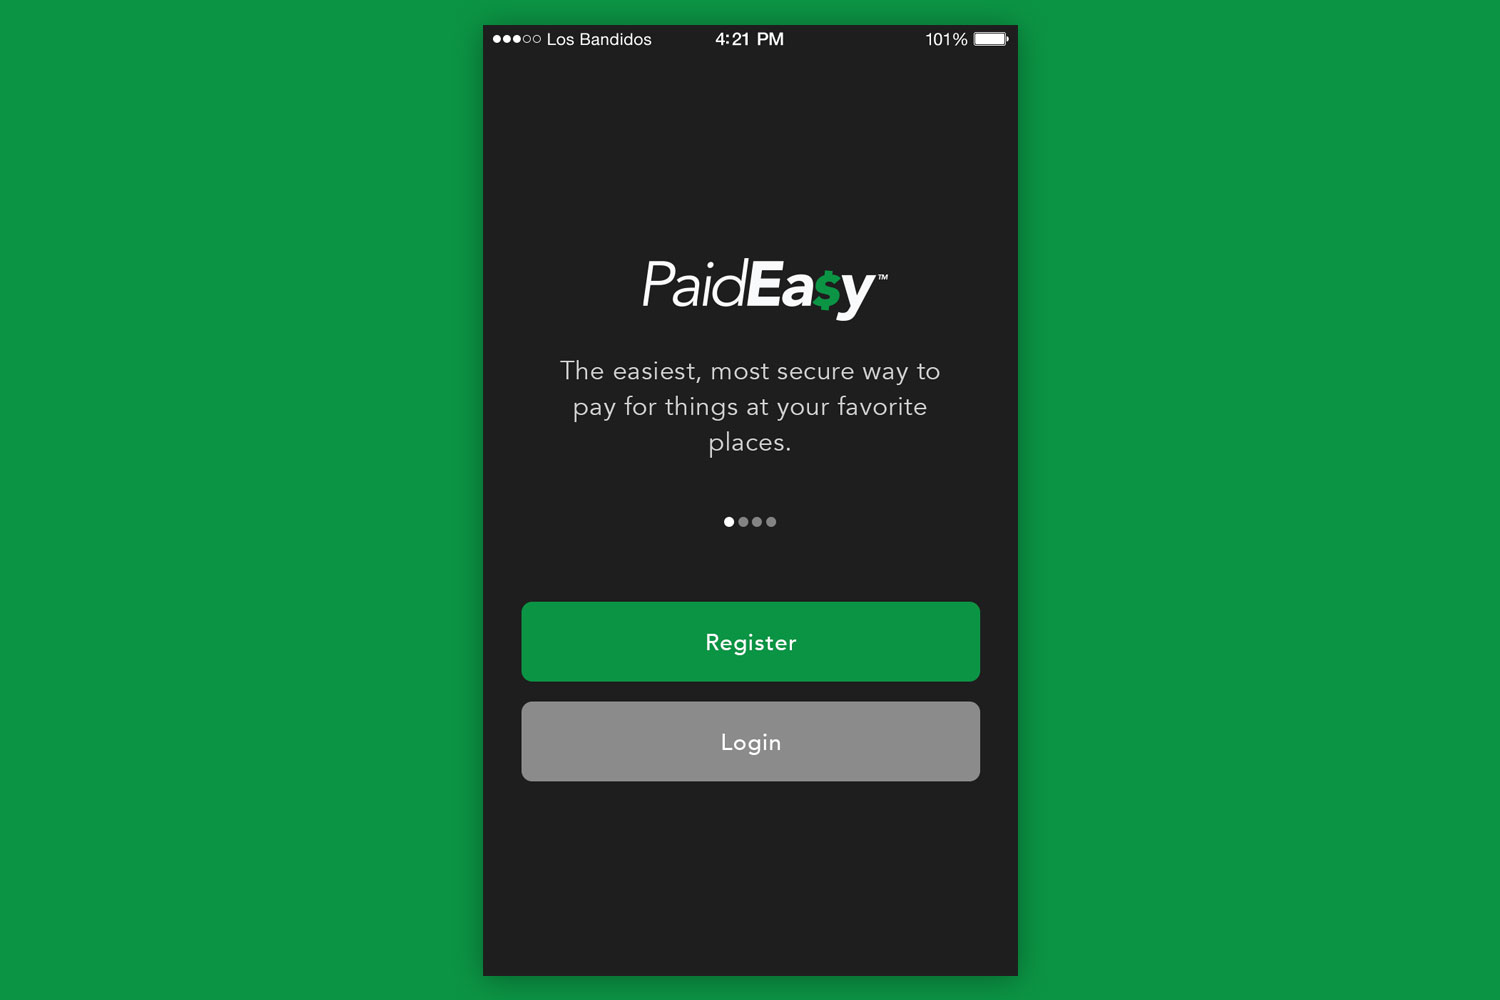 paideasy new mobile payments app 1